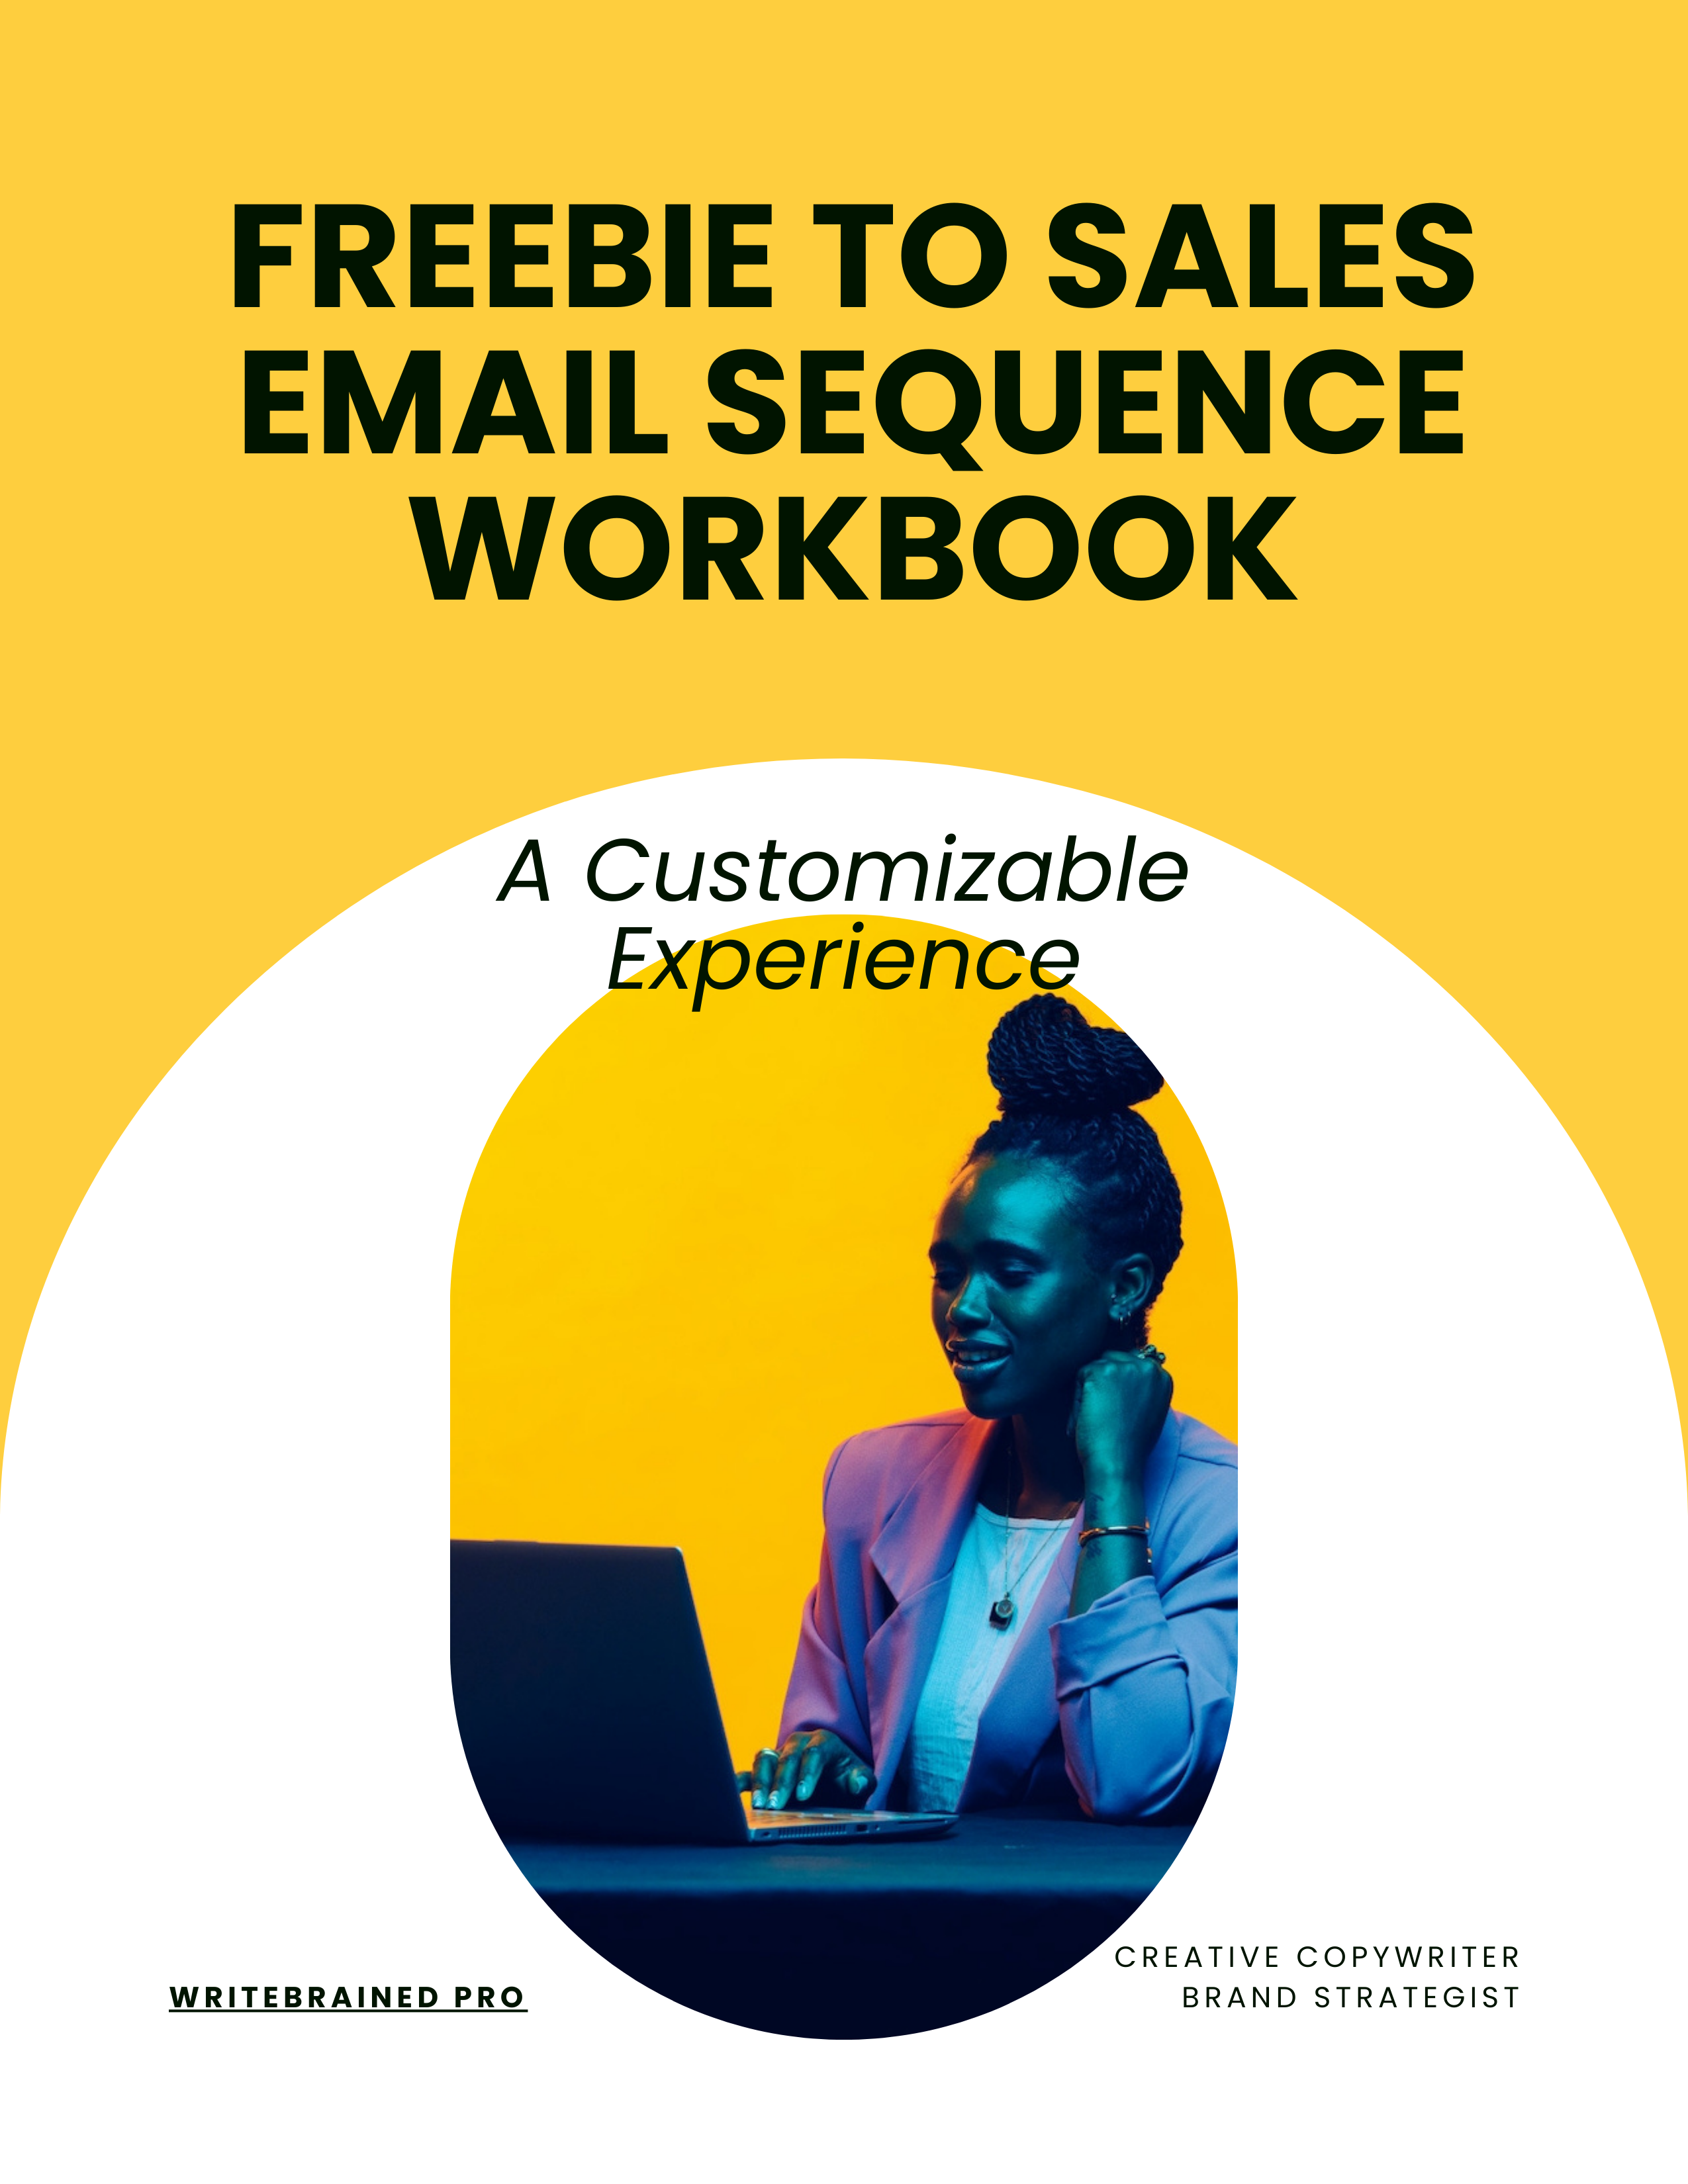 Freebie to Sales Email Sequence Workbook